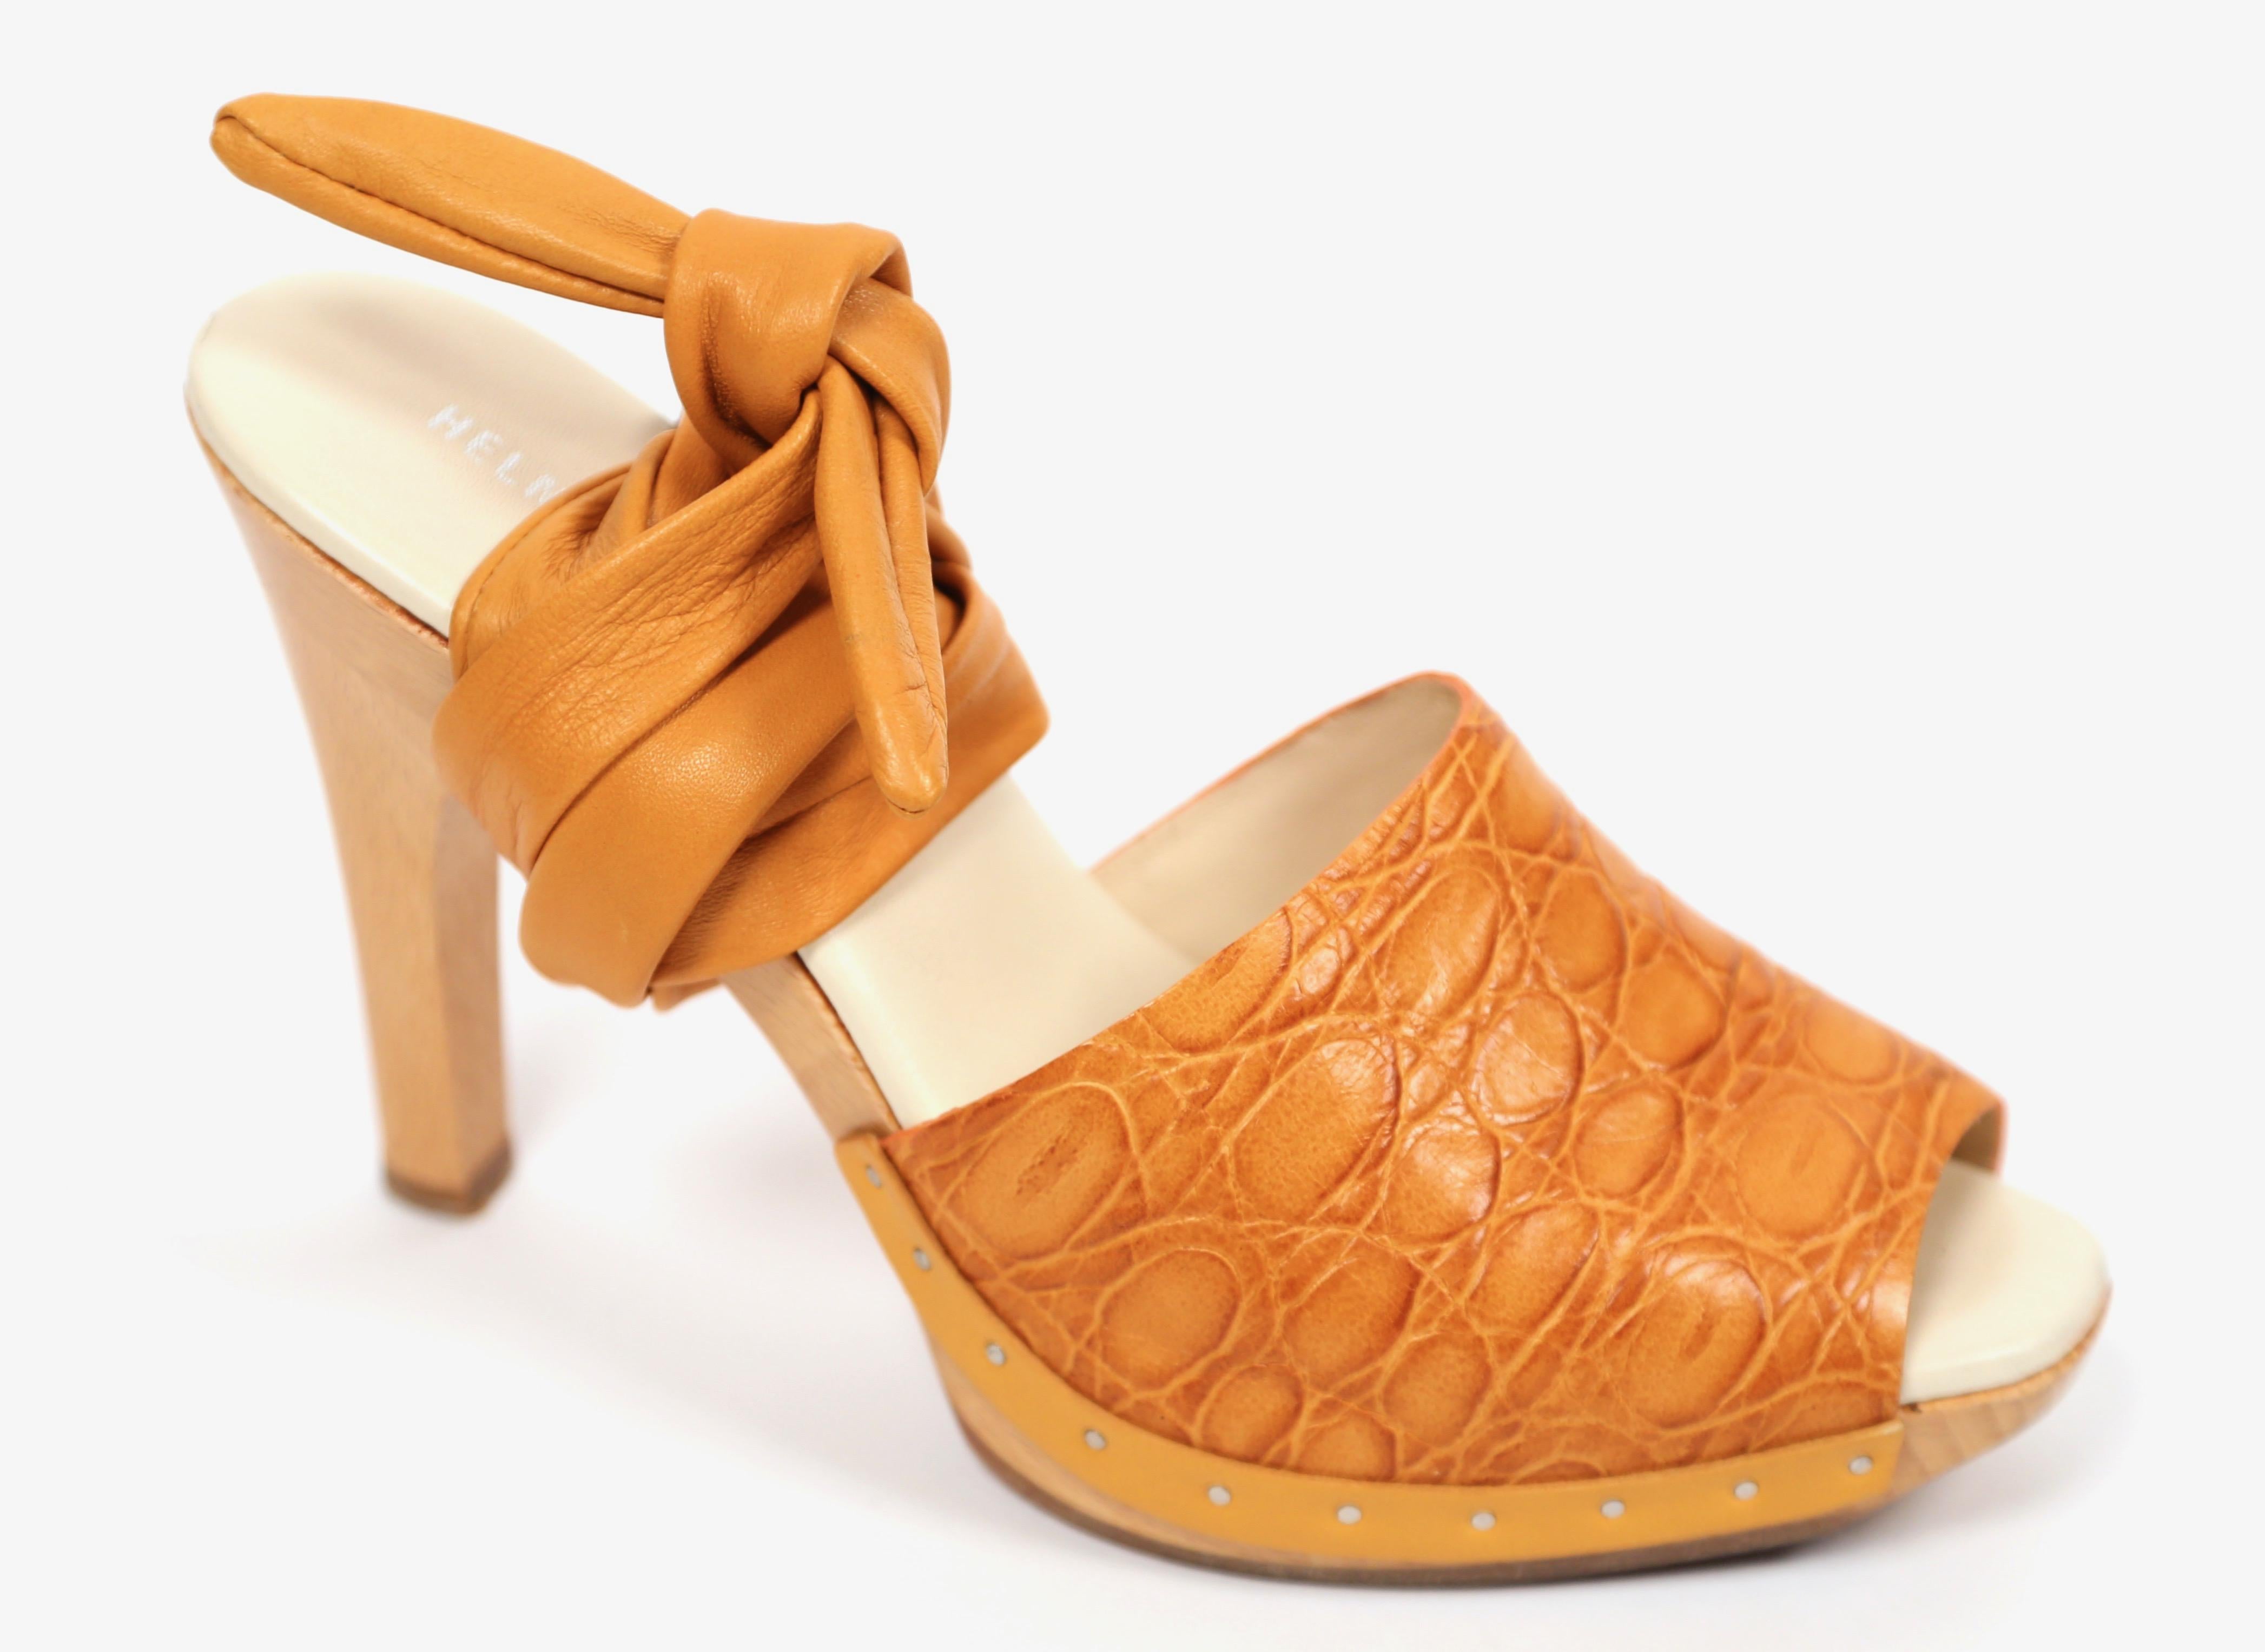 Golden-orange embossed leather platforms with silver studs and ankle straps designed by Helmut Lang dating to the 1990's. Heels are labeled an Italian size 37.5 which best fits a US 7 or 7.5. Insoles measure approximately: 9.76